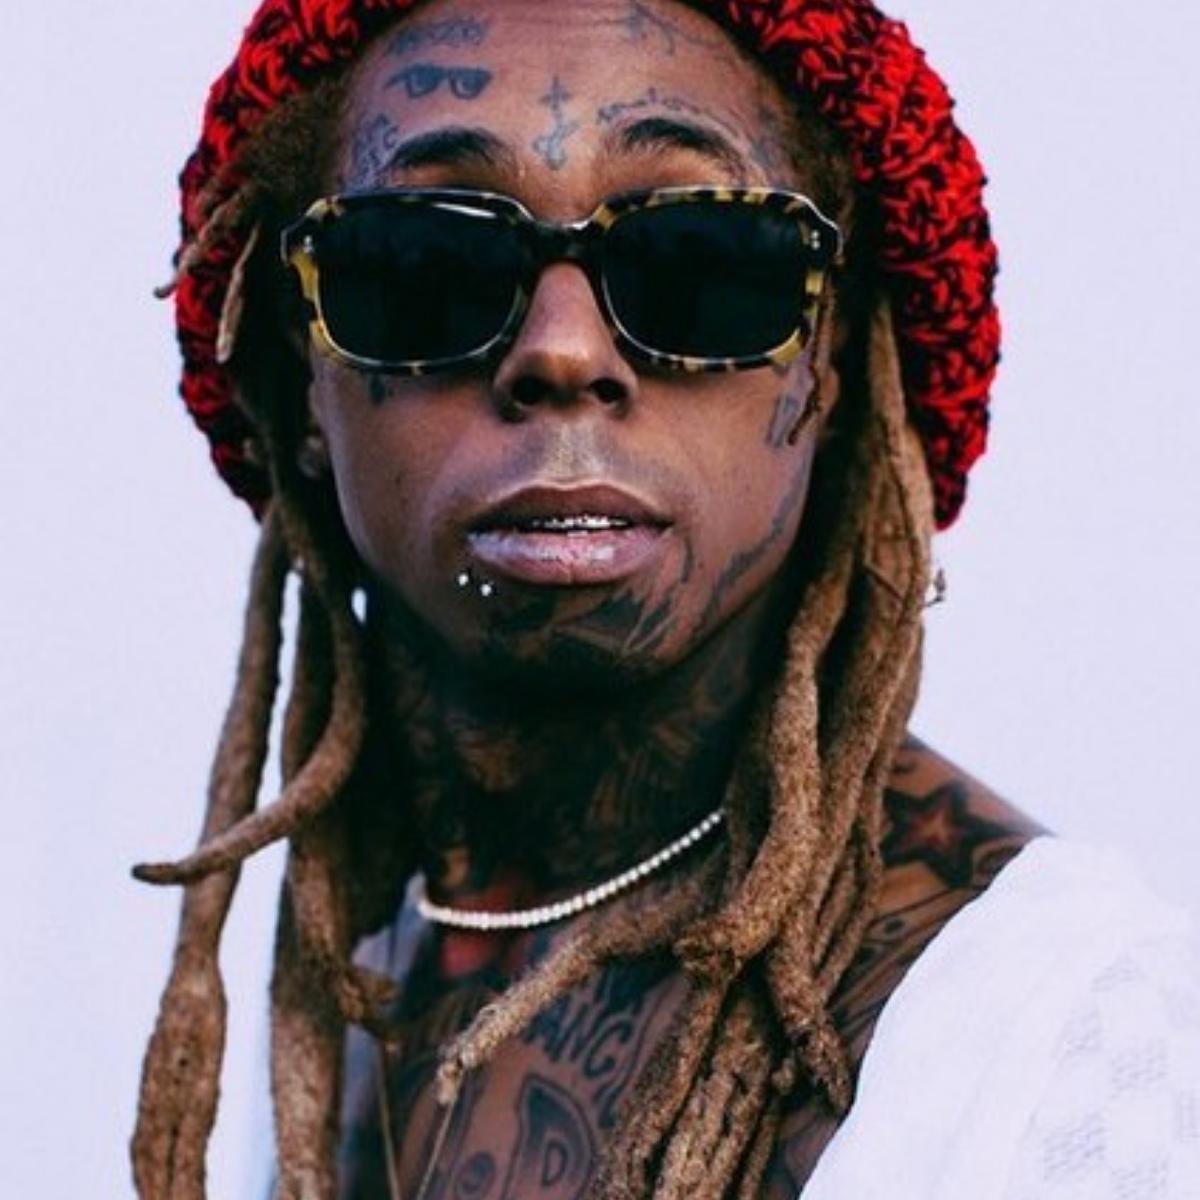 Lil Wayne Performs "Old Town Road" Remix Lollapalooza 2019